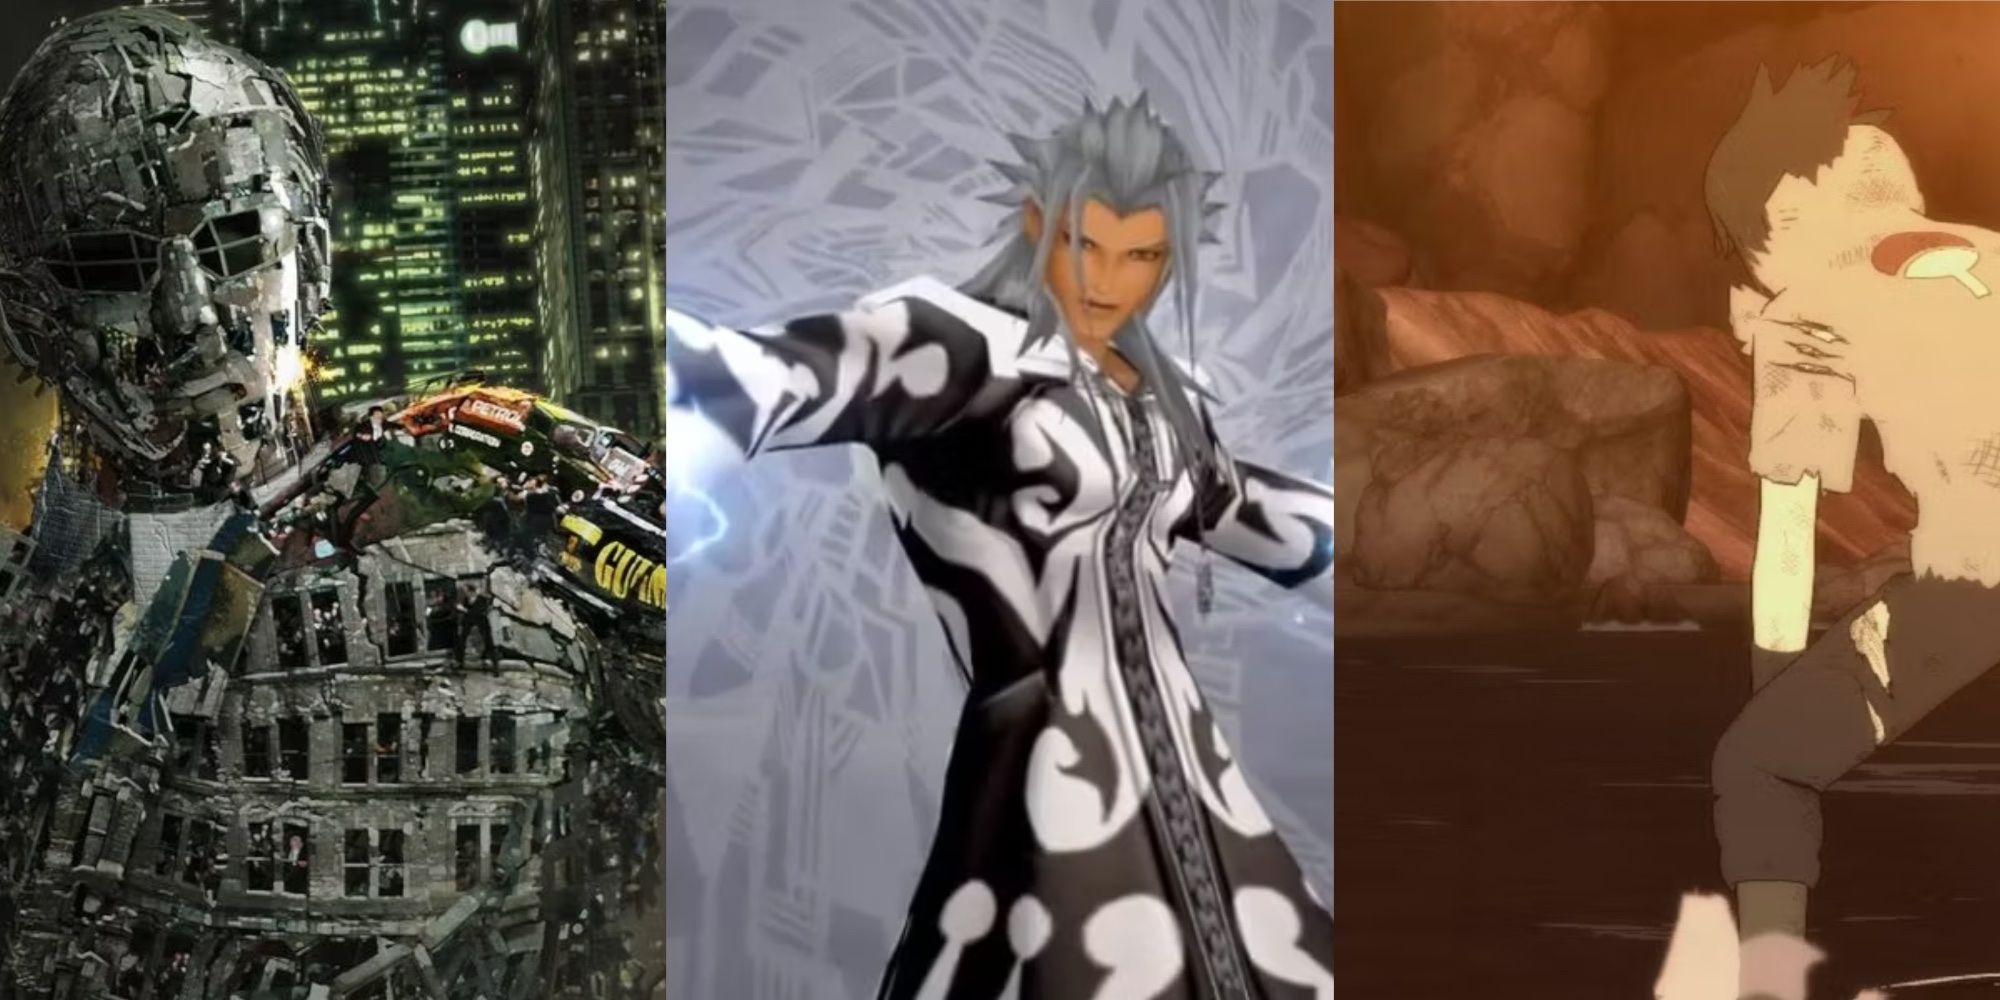 A collage showing Agent Smith from The Matrix, Xemnas from Kingdom Hearts, and Sasuke from the Naruto series.